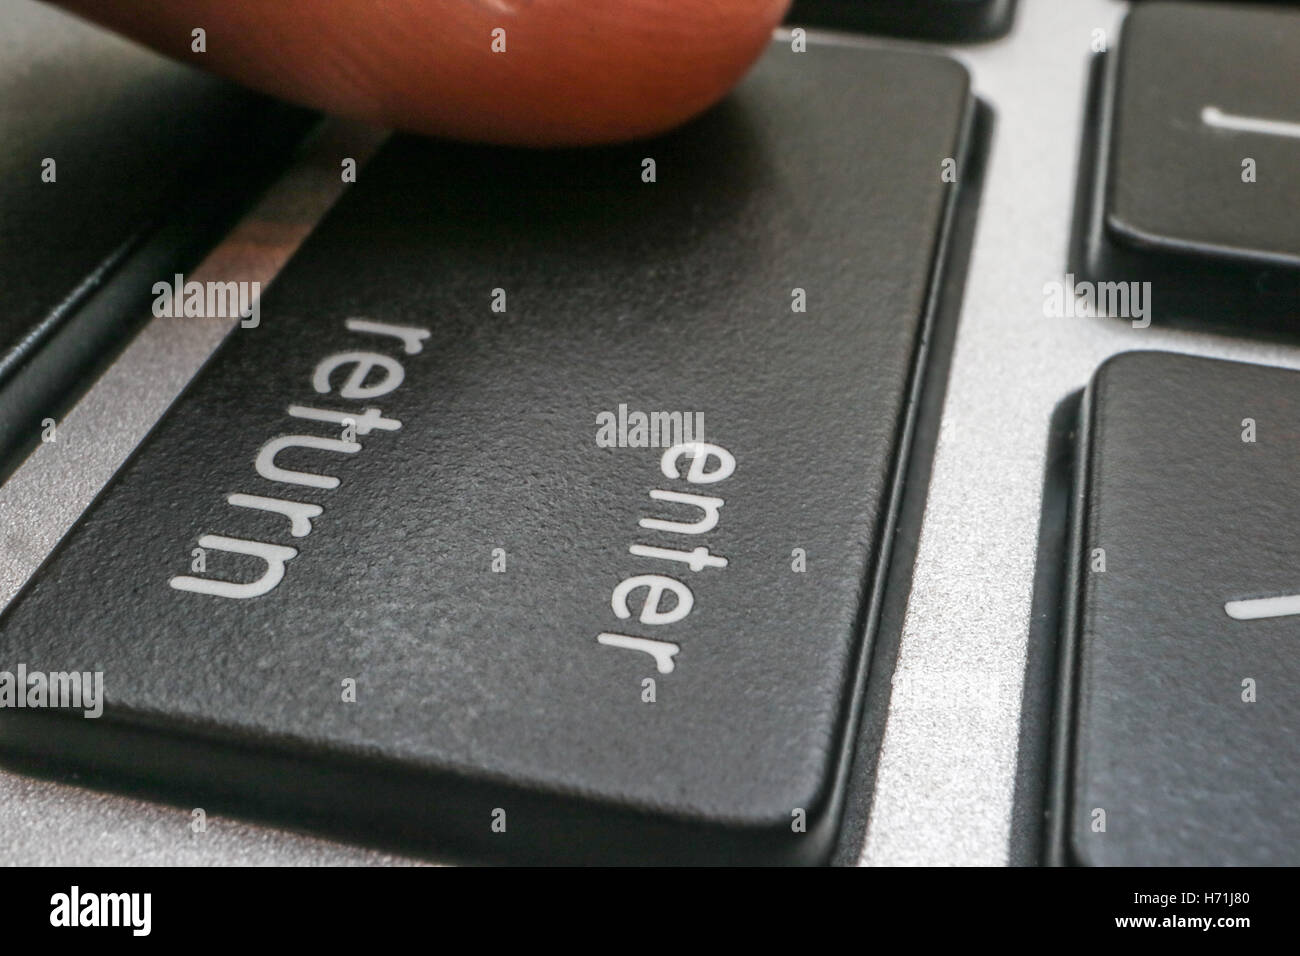 computer enter key with finger pressing button Stock Photo